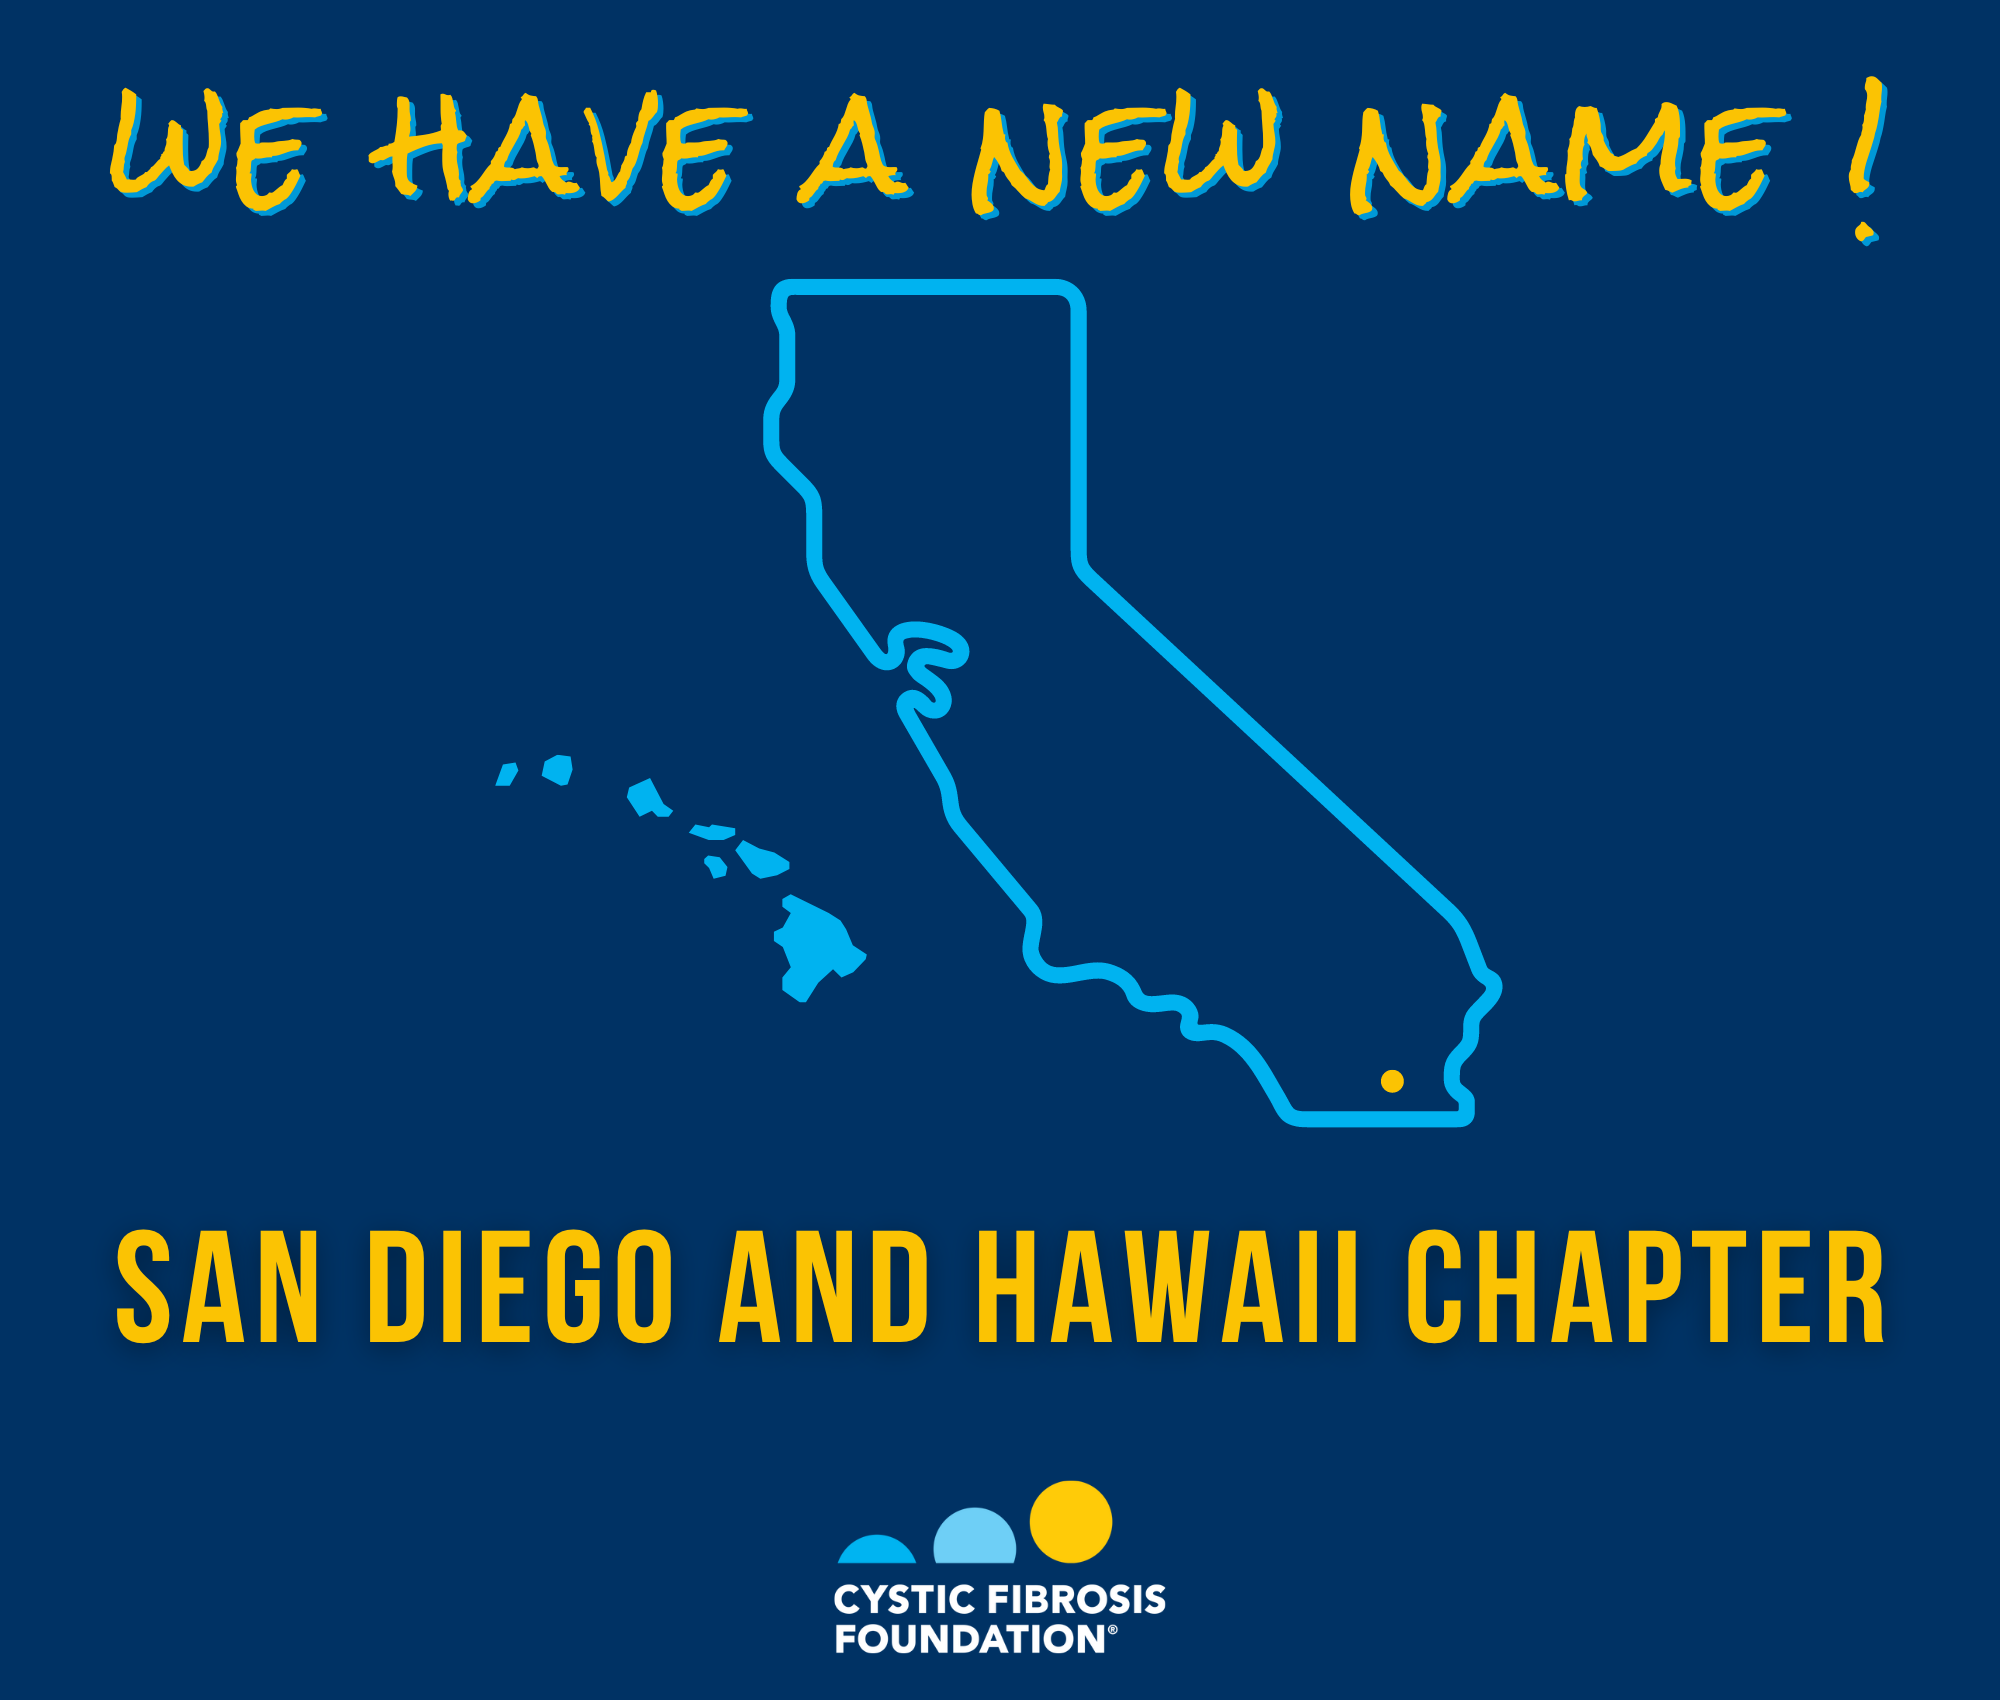 We have a new name! San Diego and Hawaii Chapter